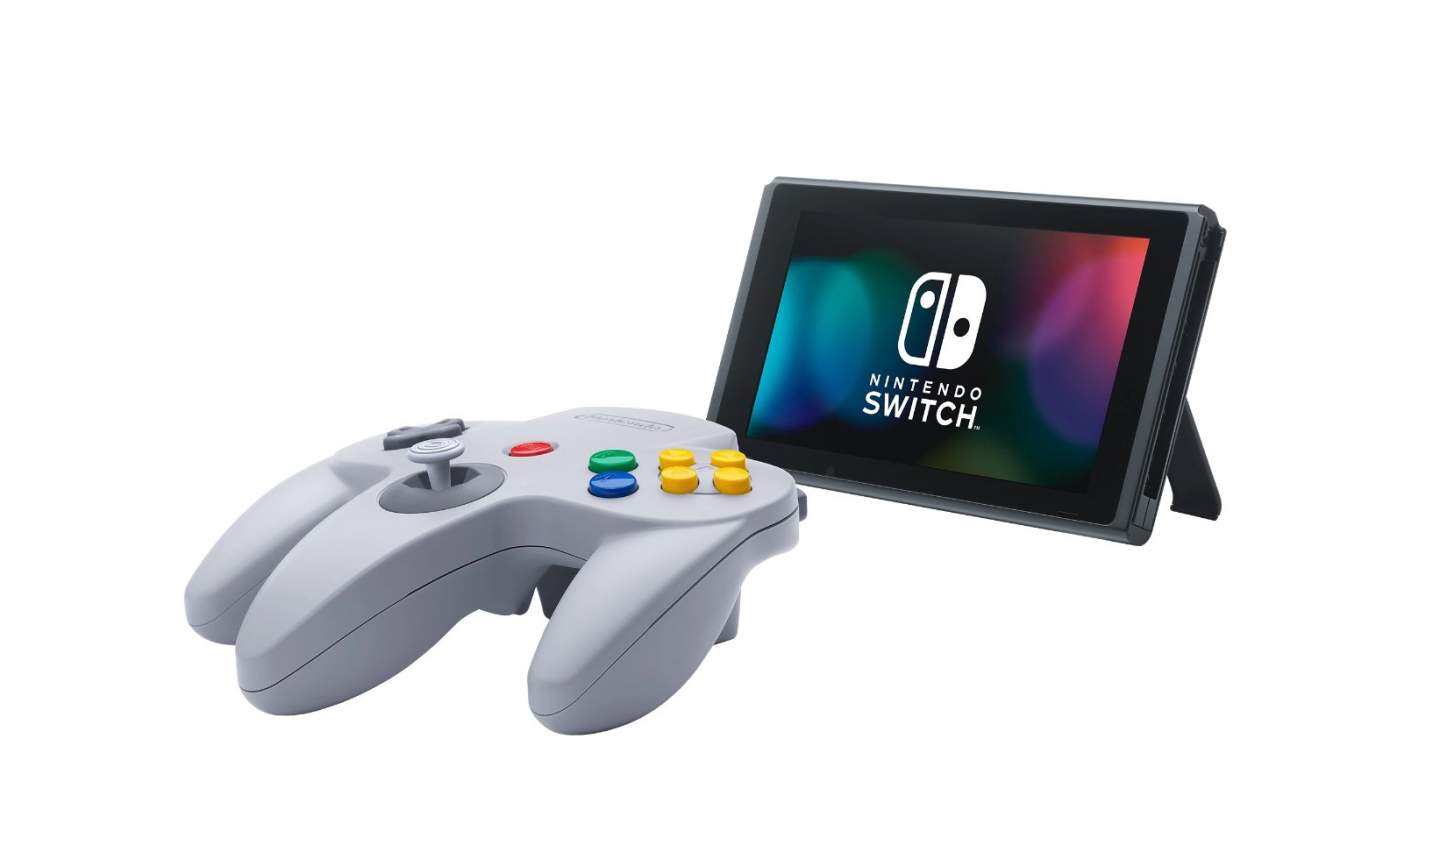 alleen Portaal stijfheid Nintendo Switch N64, Genesis controllers up for pre-order: Here's how much  they cost - SlashGear